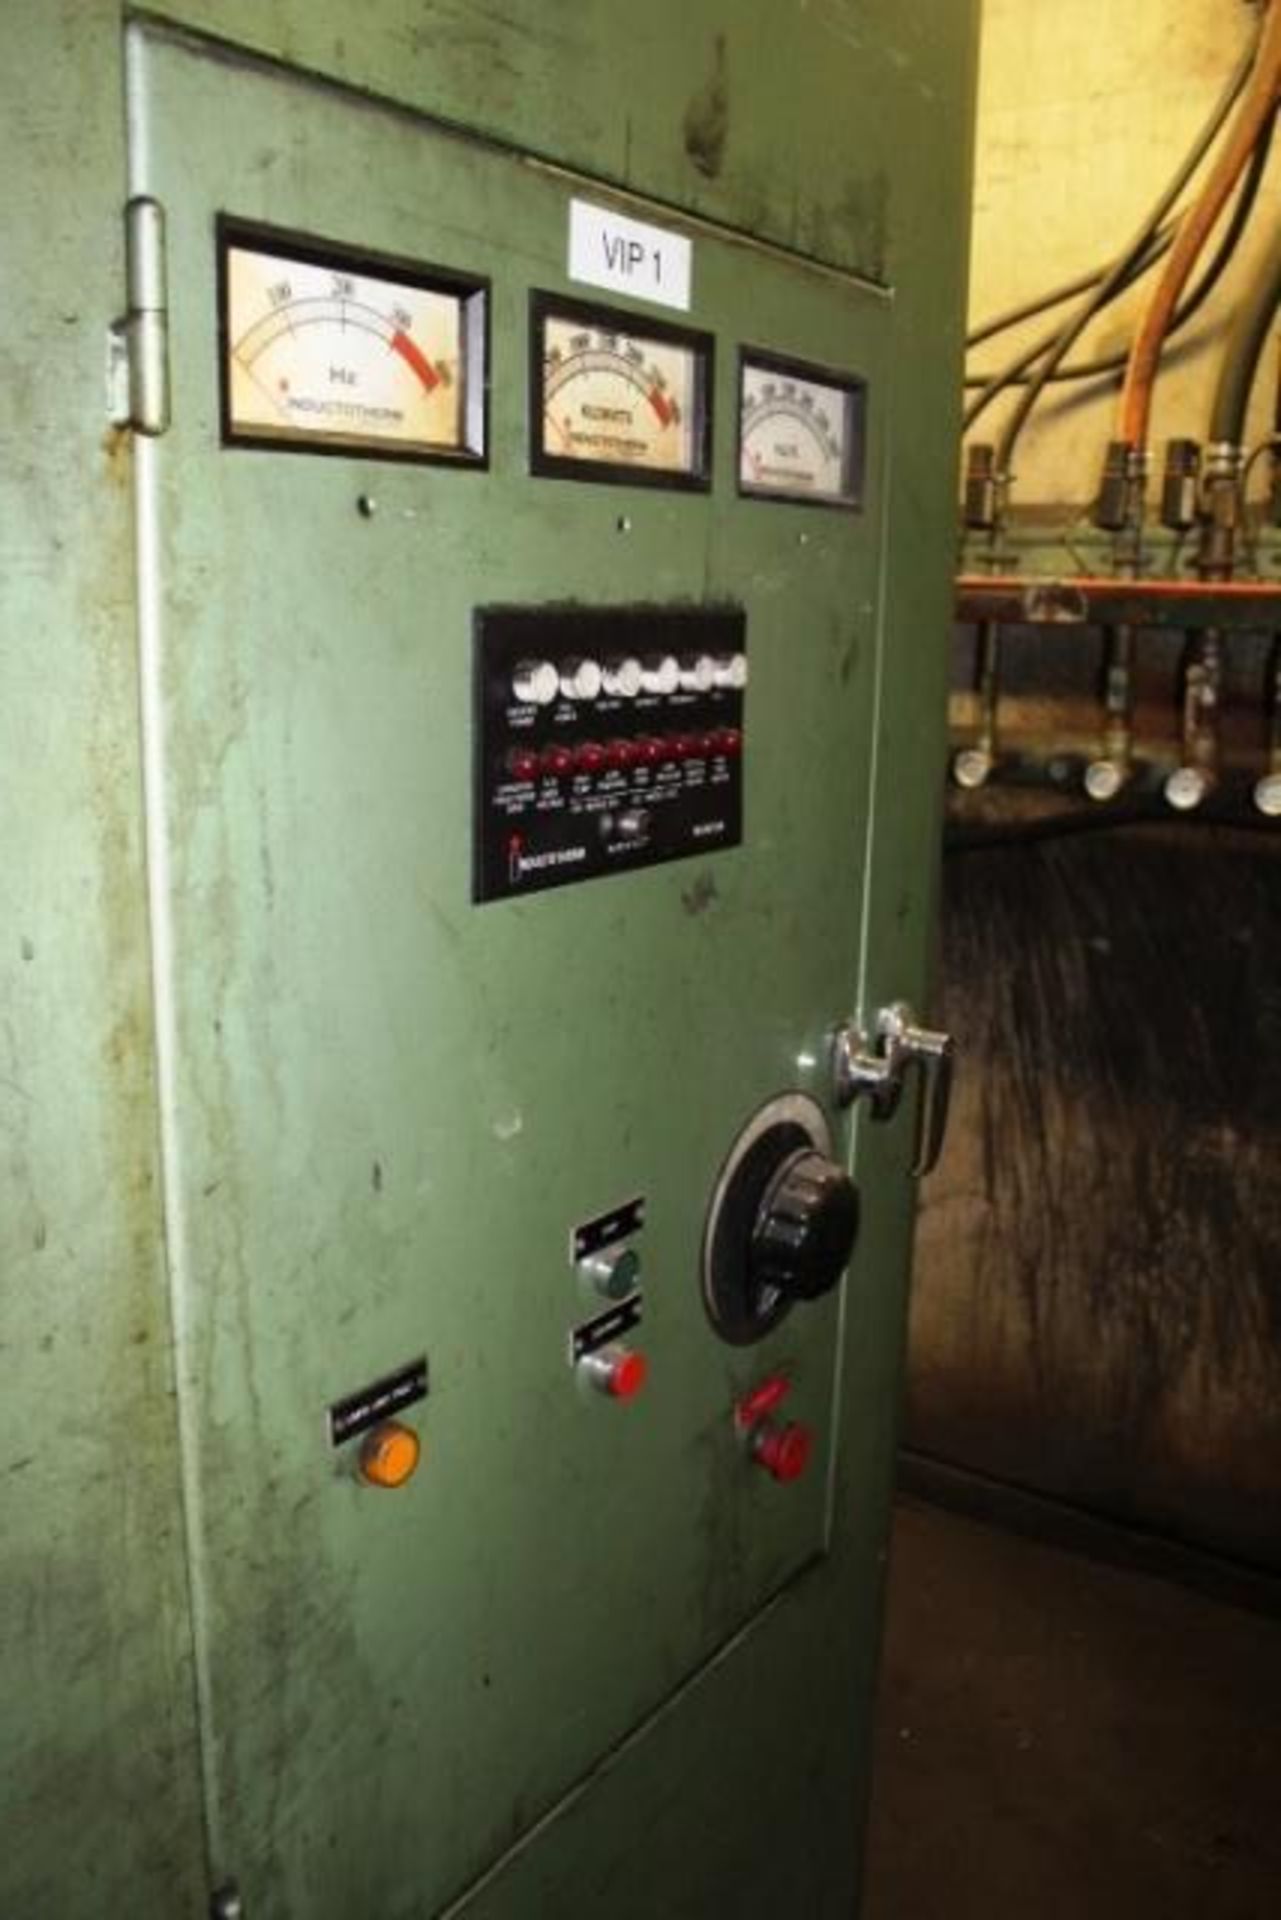 Inductotherm model 2500 Powertrack, serial no: N/A (1991) [VIP 1] 4T capacity, 2500kw induction - Image 5 of 21